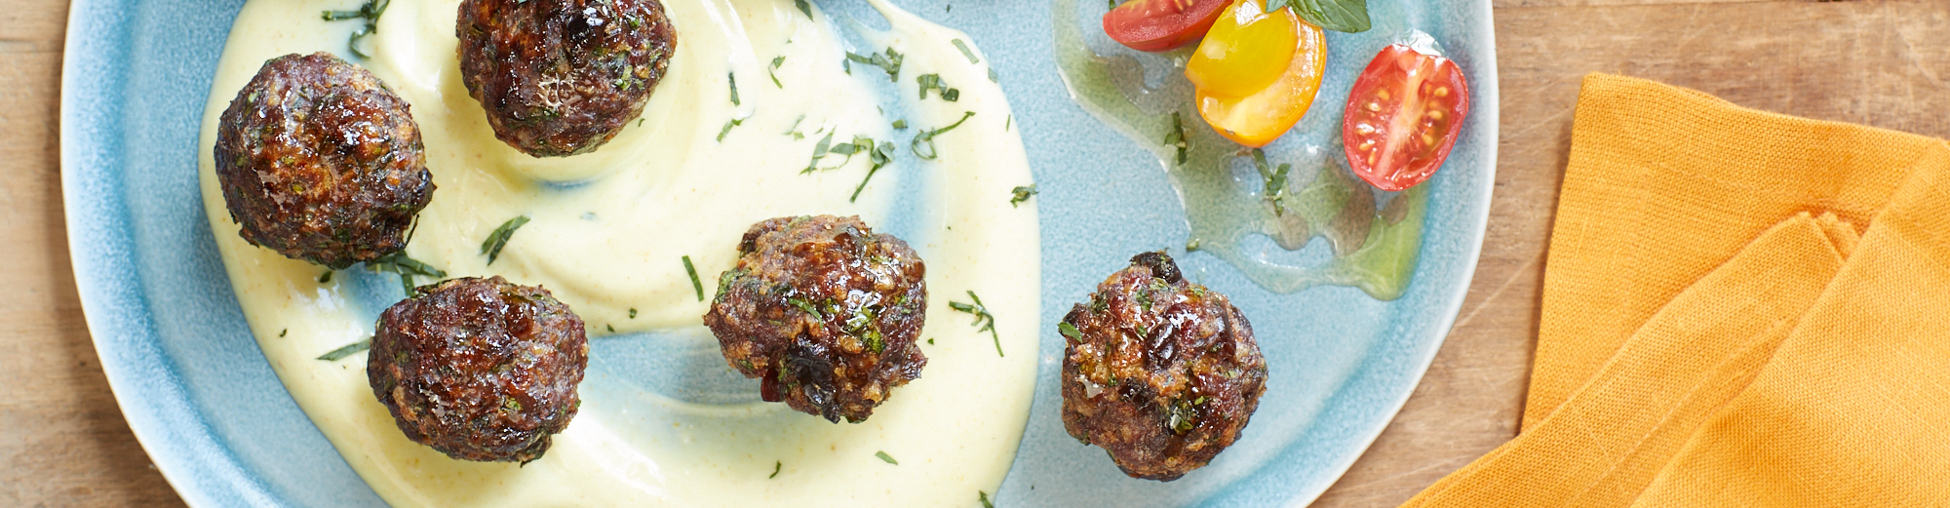 The sweetness of prunes balances out the savory flavors of cumin and garlic in these bite-sized meatballs. Serve them in wraps and sandwiches.